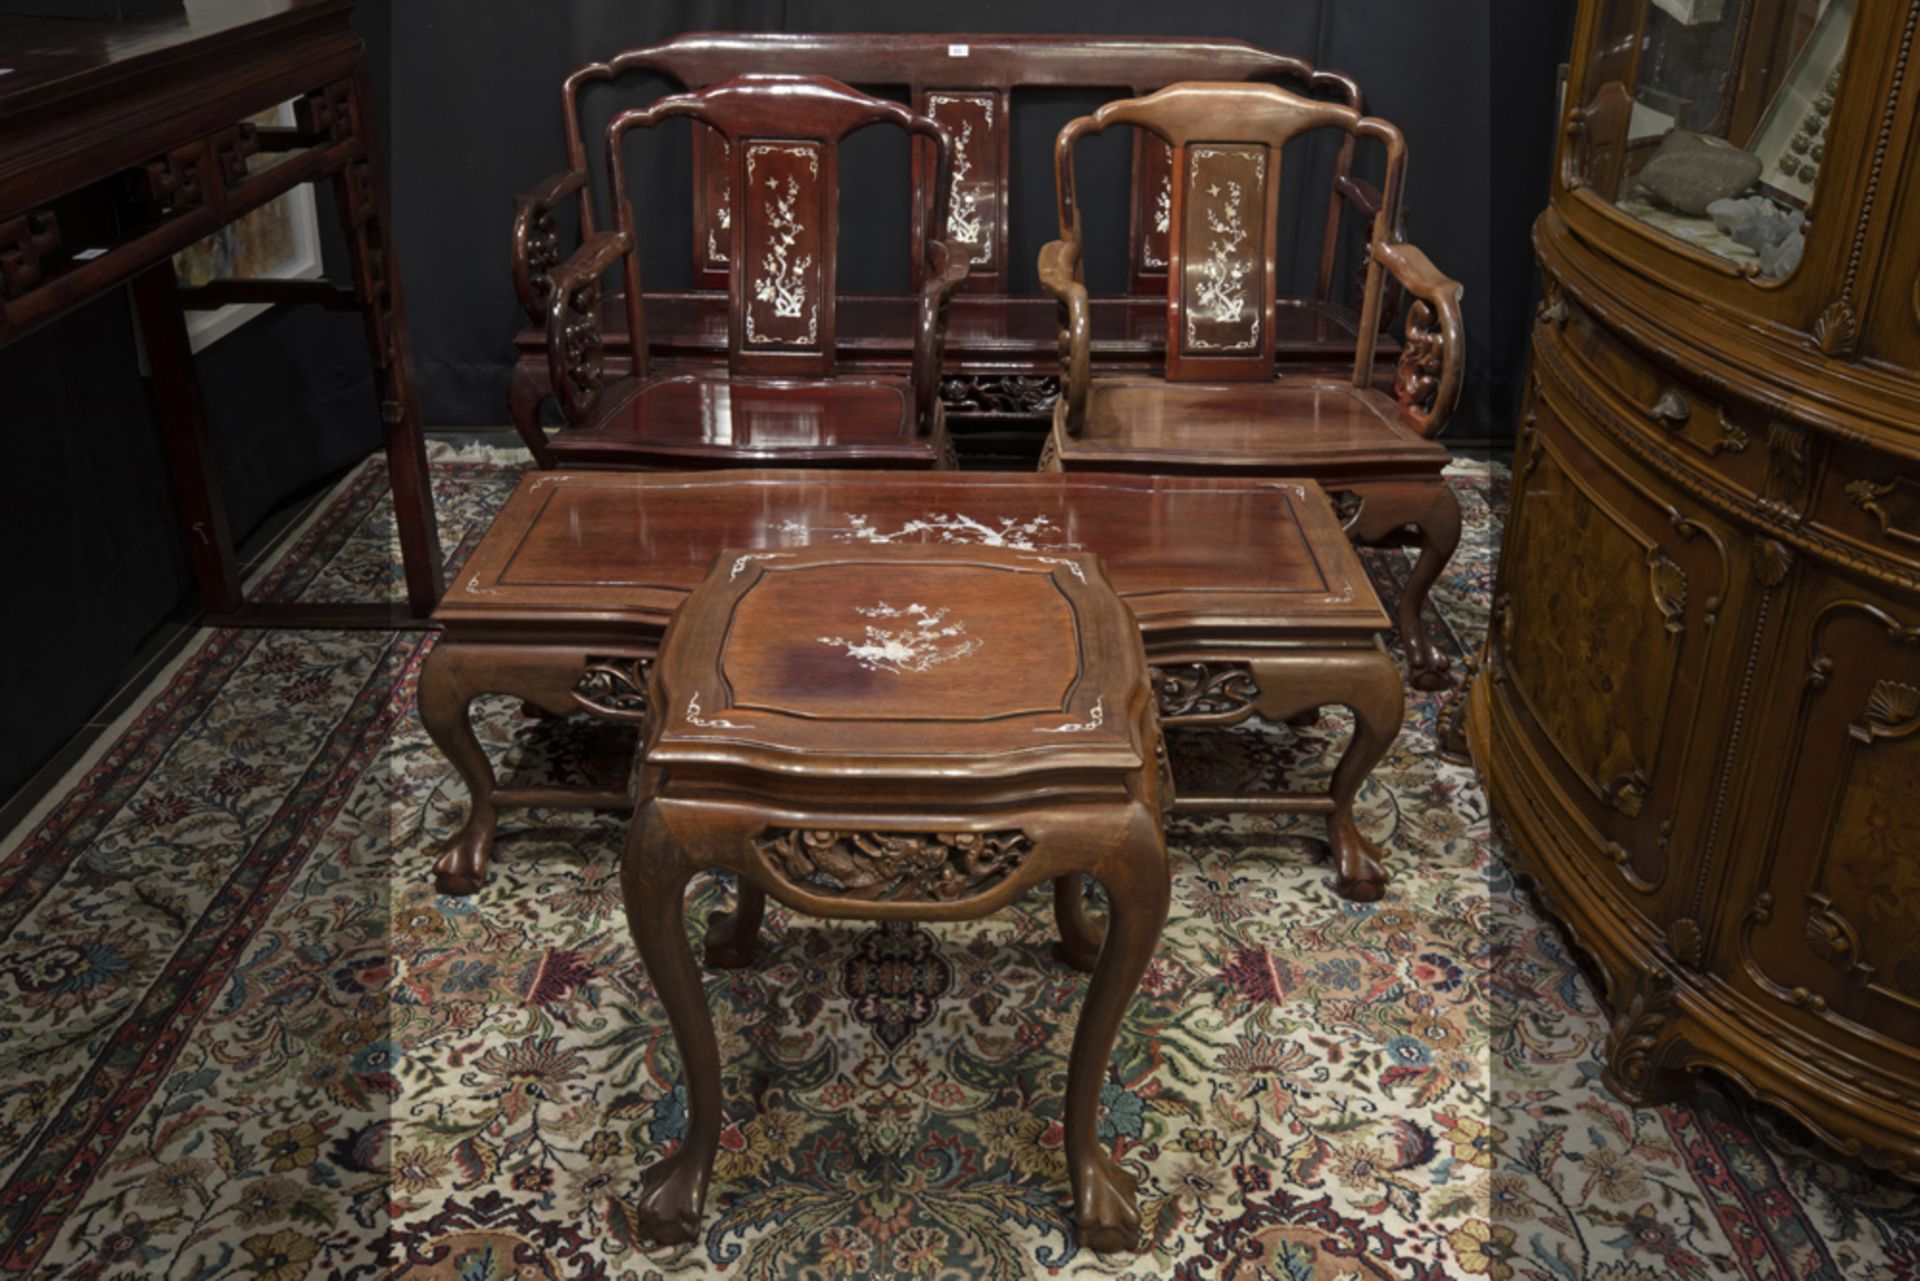 5pc 'Chinese' salon suite in rose-wood with inlay in mother of pearl and with sculpted ornamentation